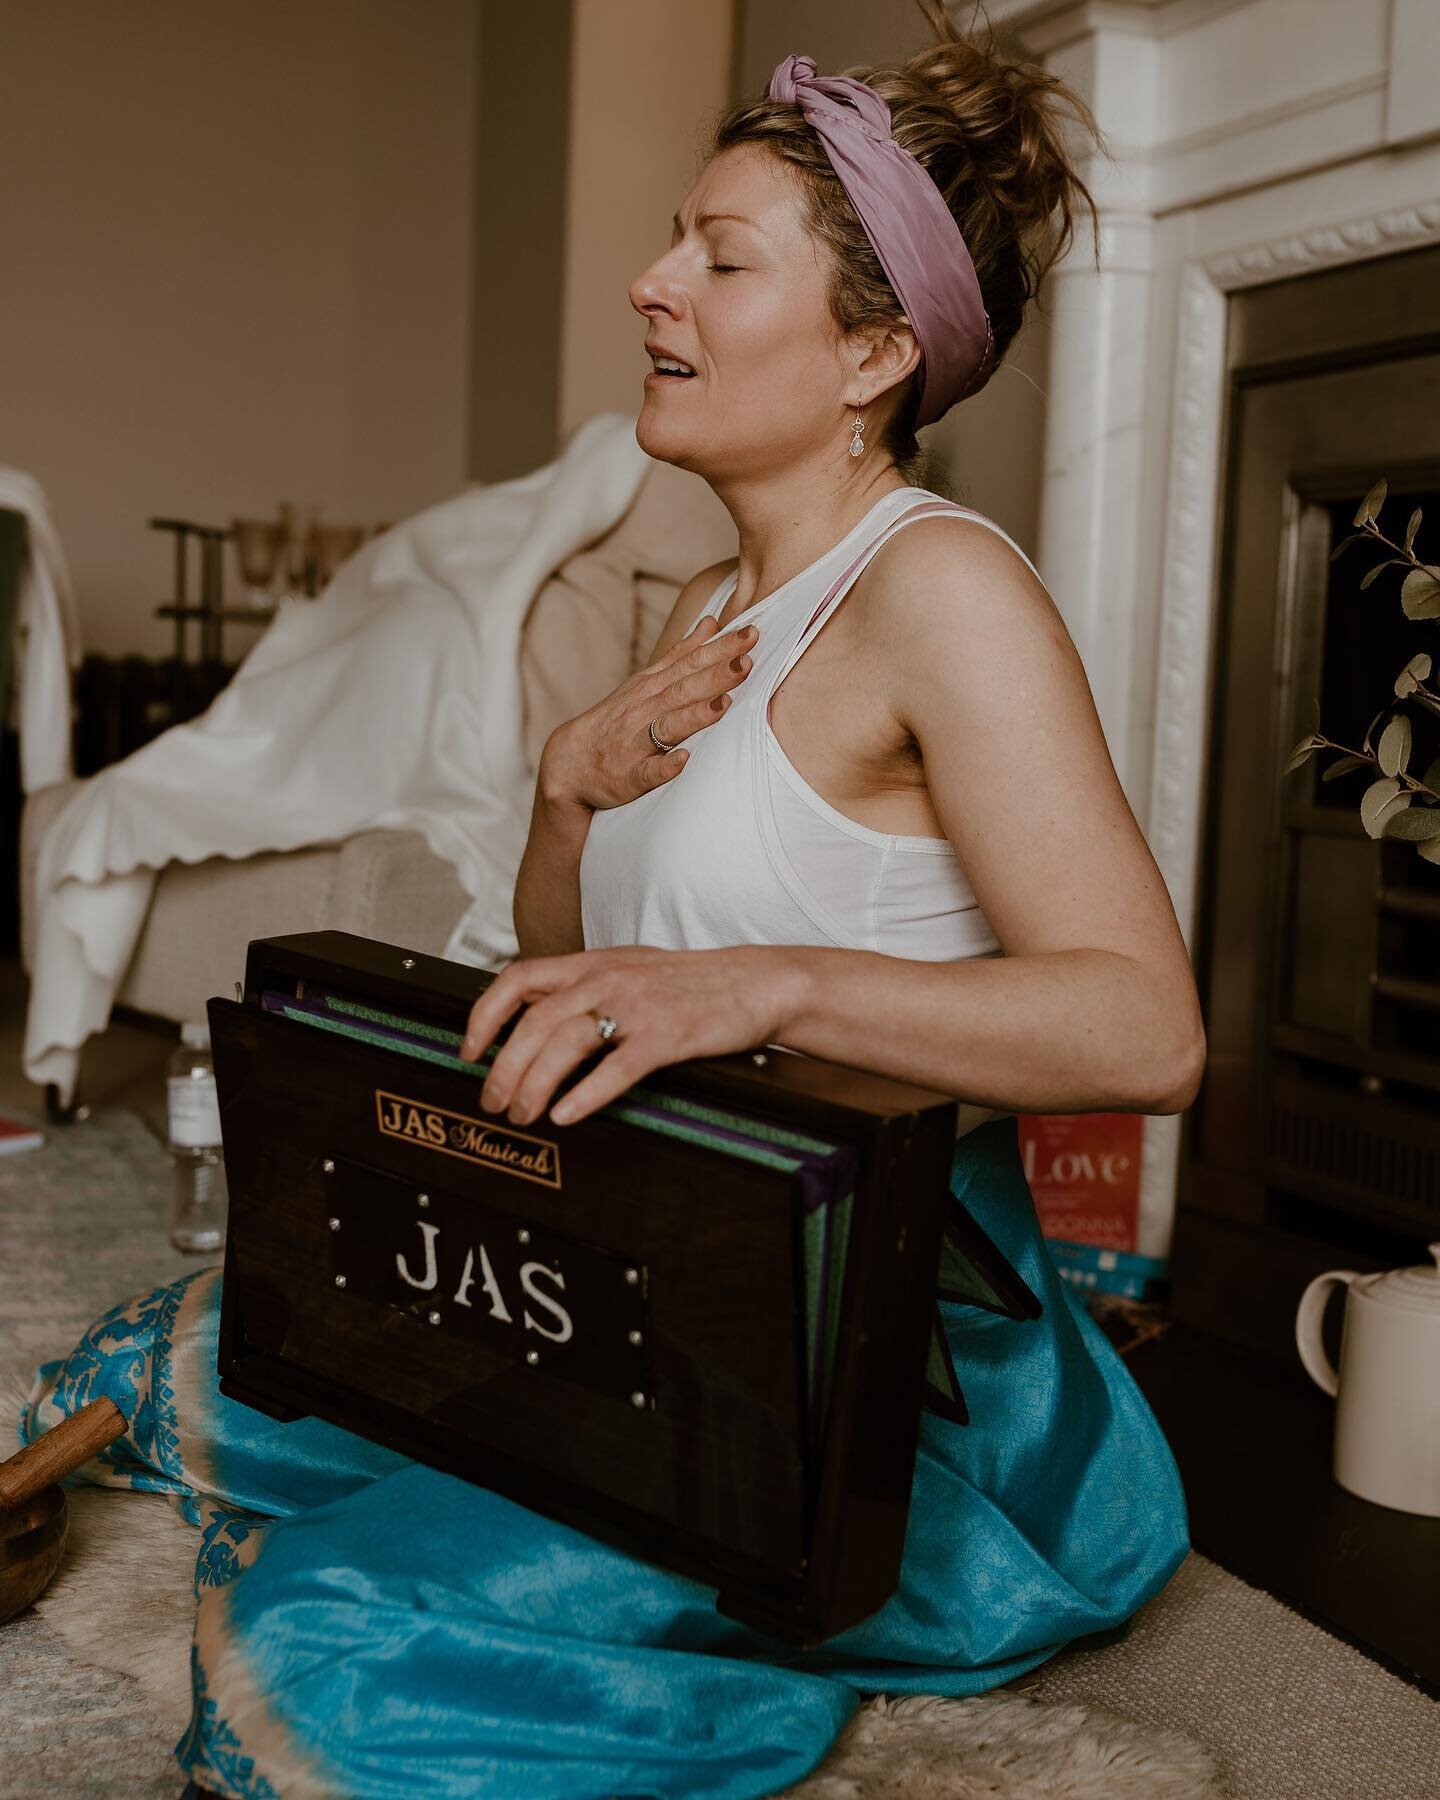 Emma and Iare back with a lovely Healing Ceremony for you on International Dance Day!

April 29th @calmoncanningstreet 4-7pm

Join us for a space to connect with yourself &amp; others: 
Opening: 
Tuning into your Heart &amp; Ceremonial Cacao ~ delici